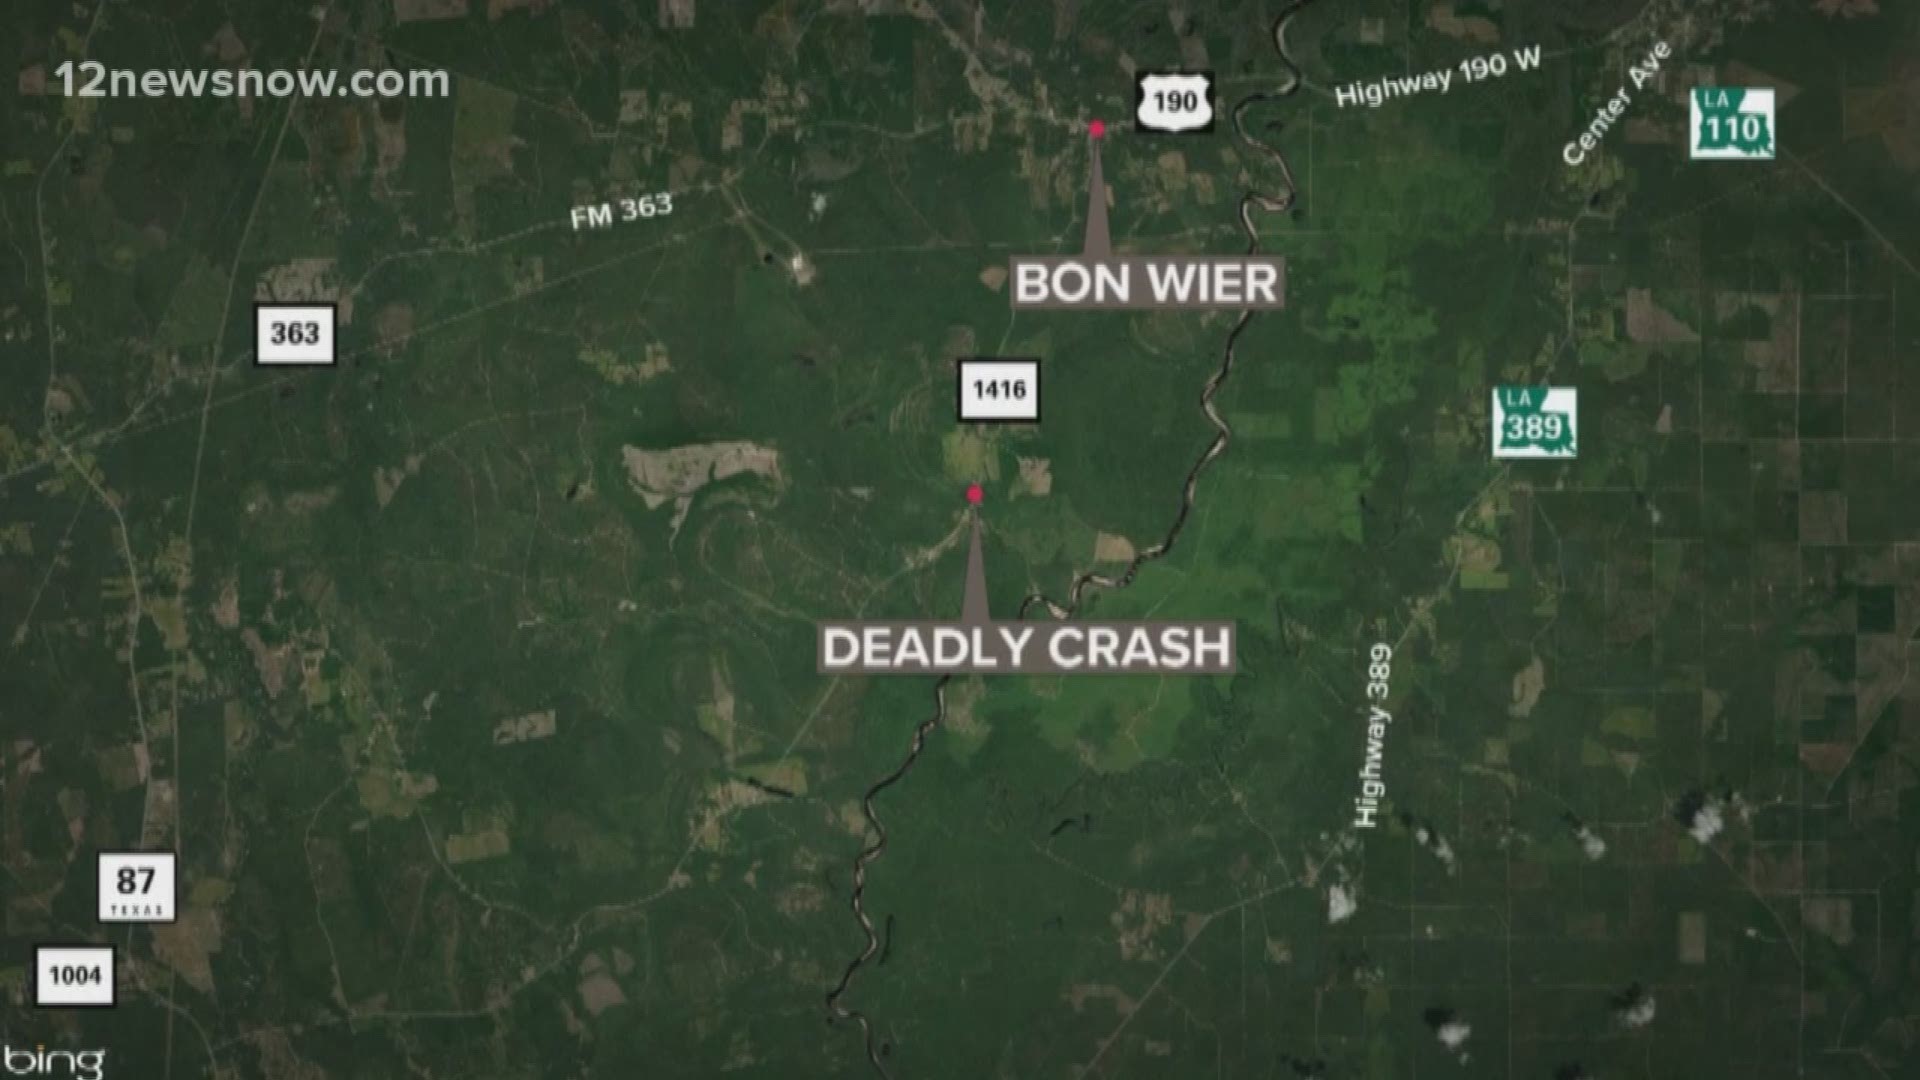 A 17-year-old was killed in the Friday wreck